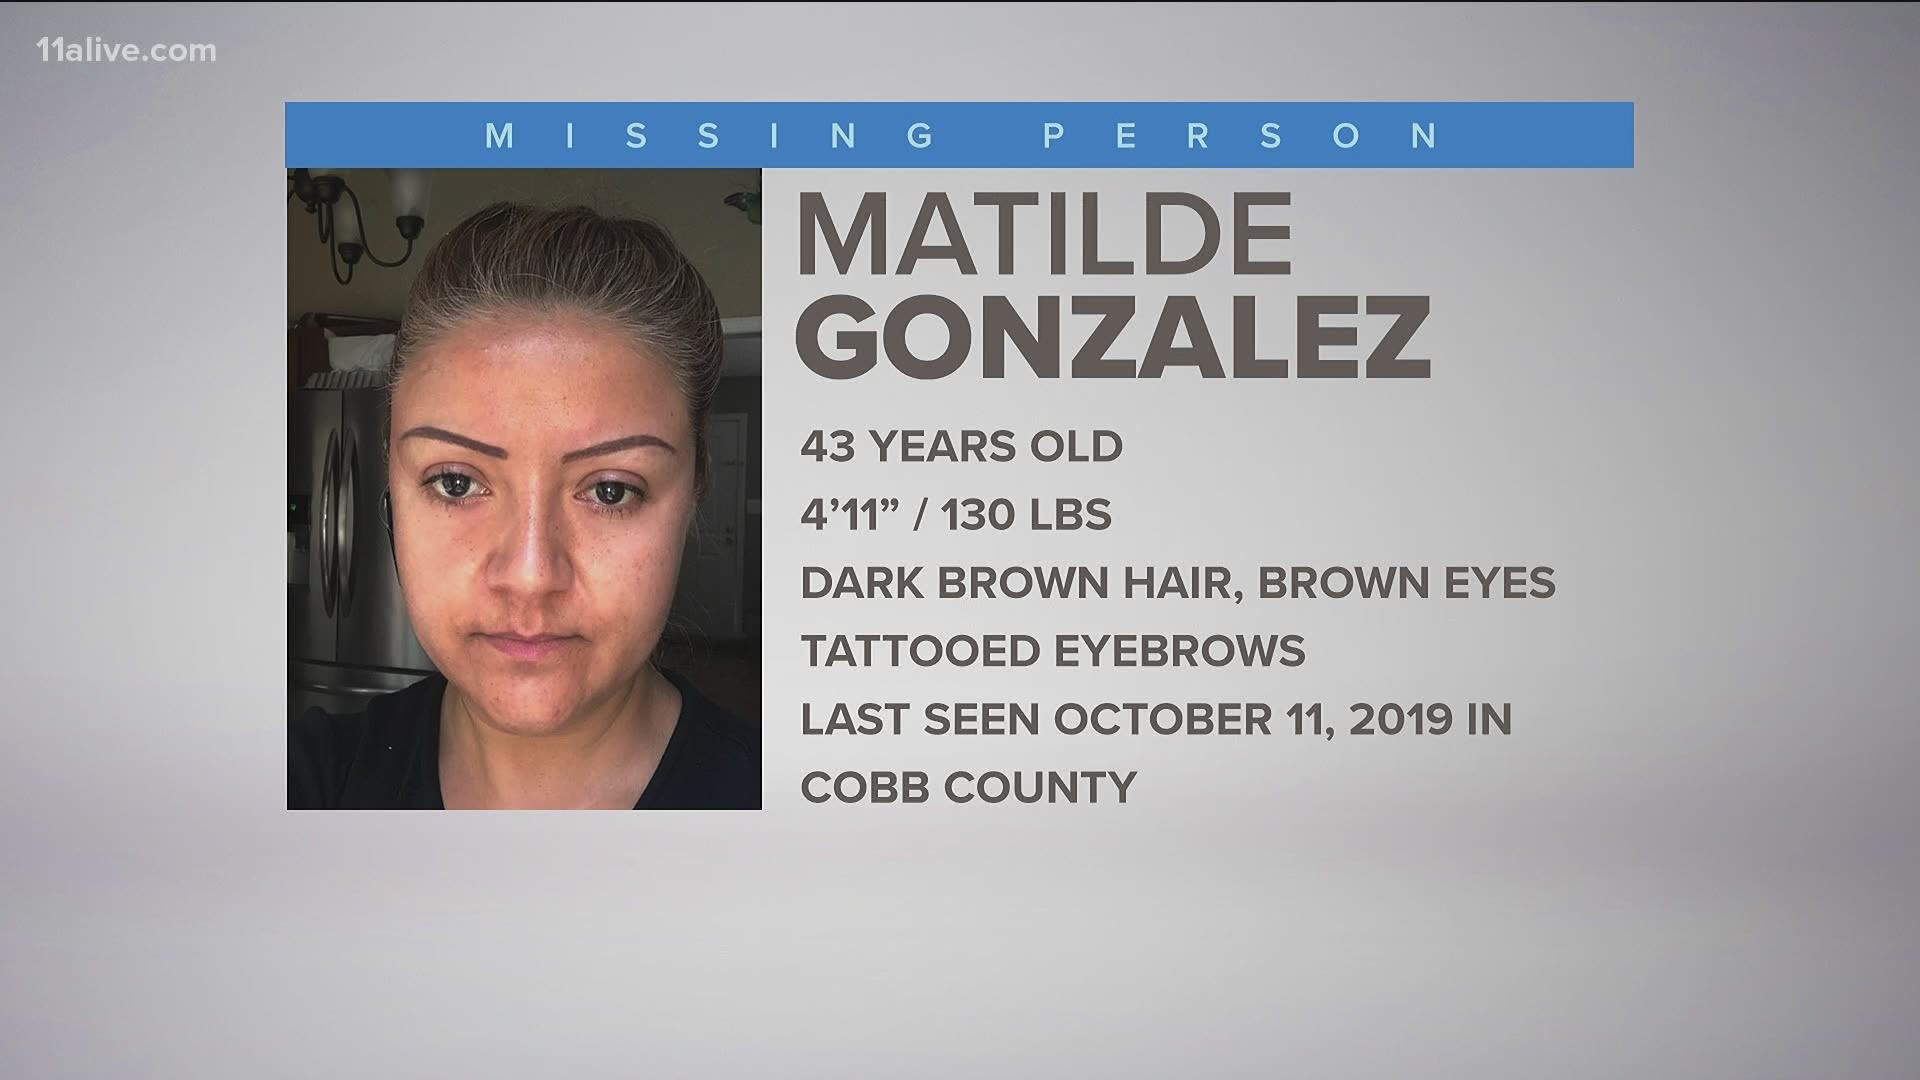 Family and friends of Matilde Gonzalez have not seen or heard from her since Oct. 2019